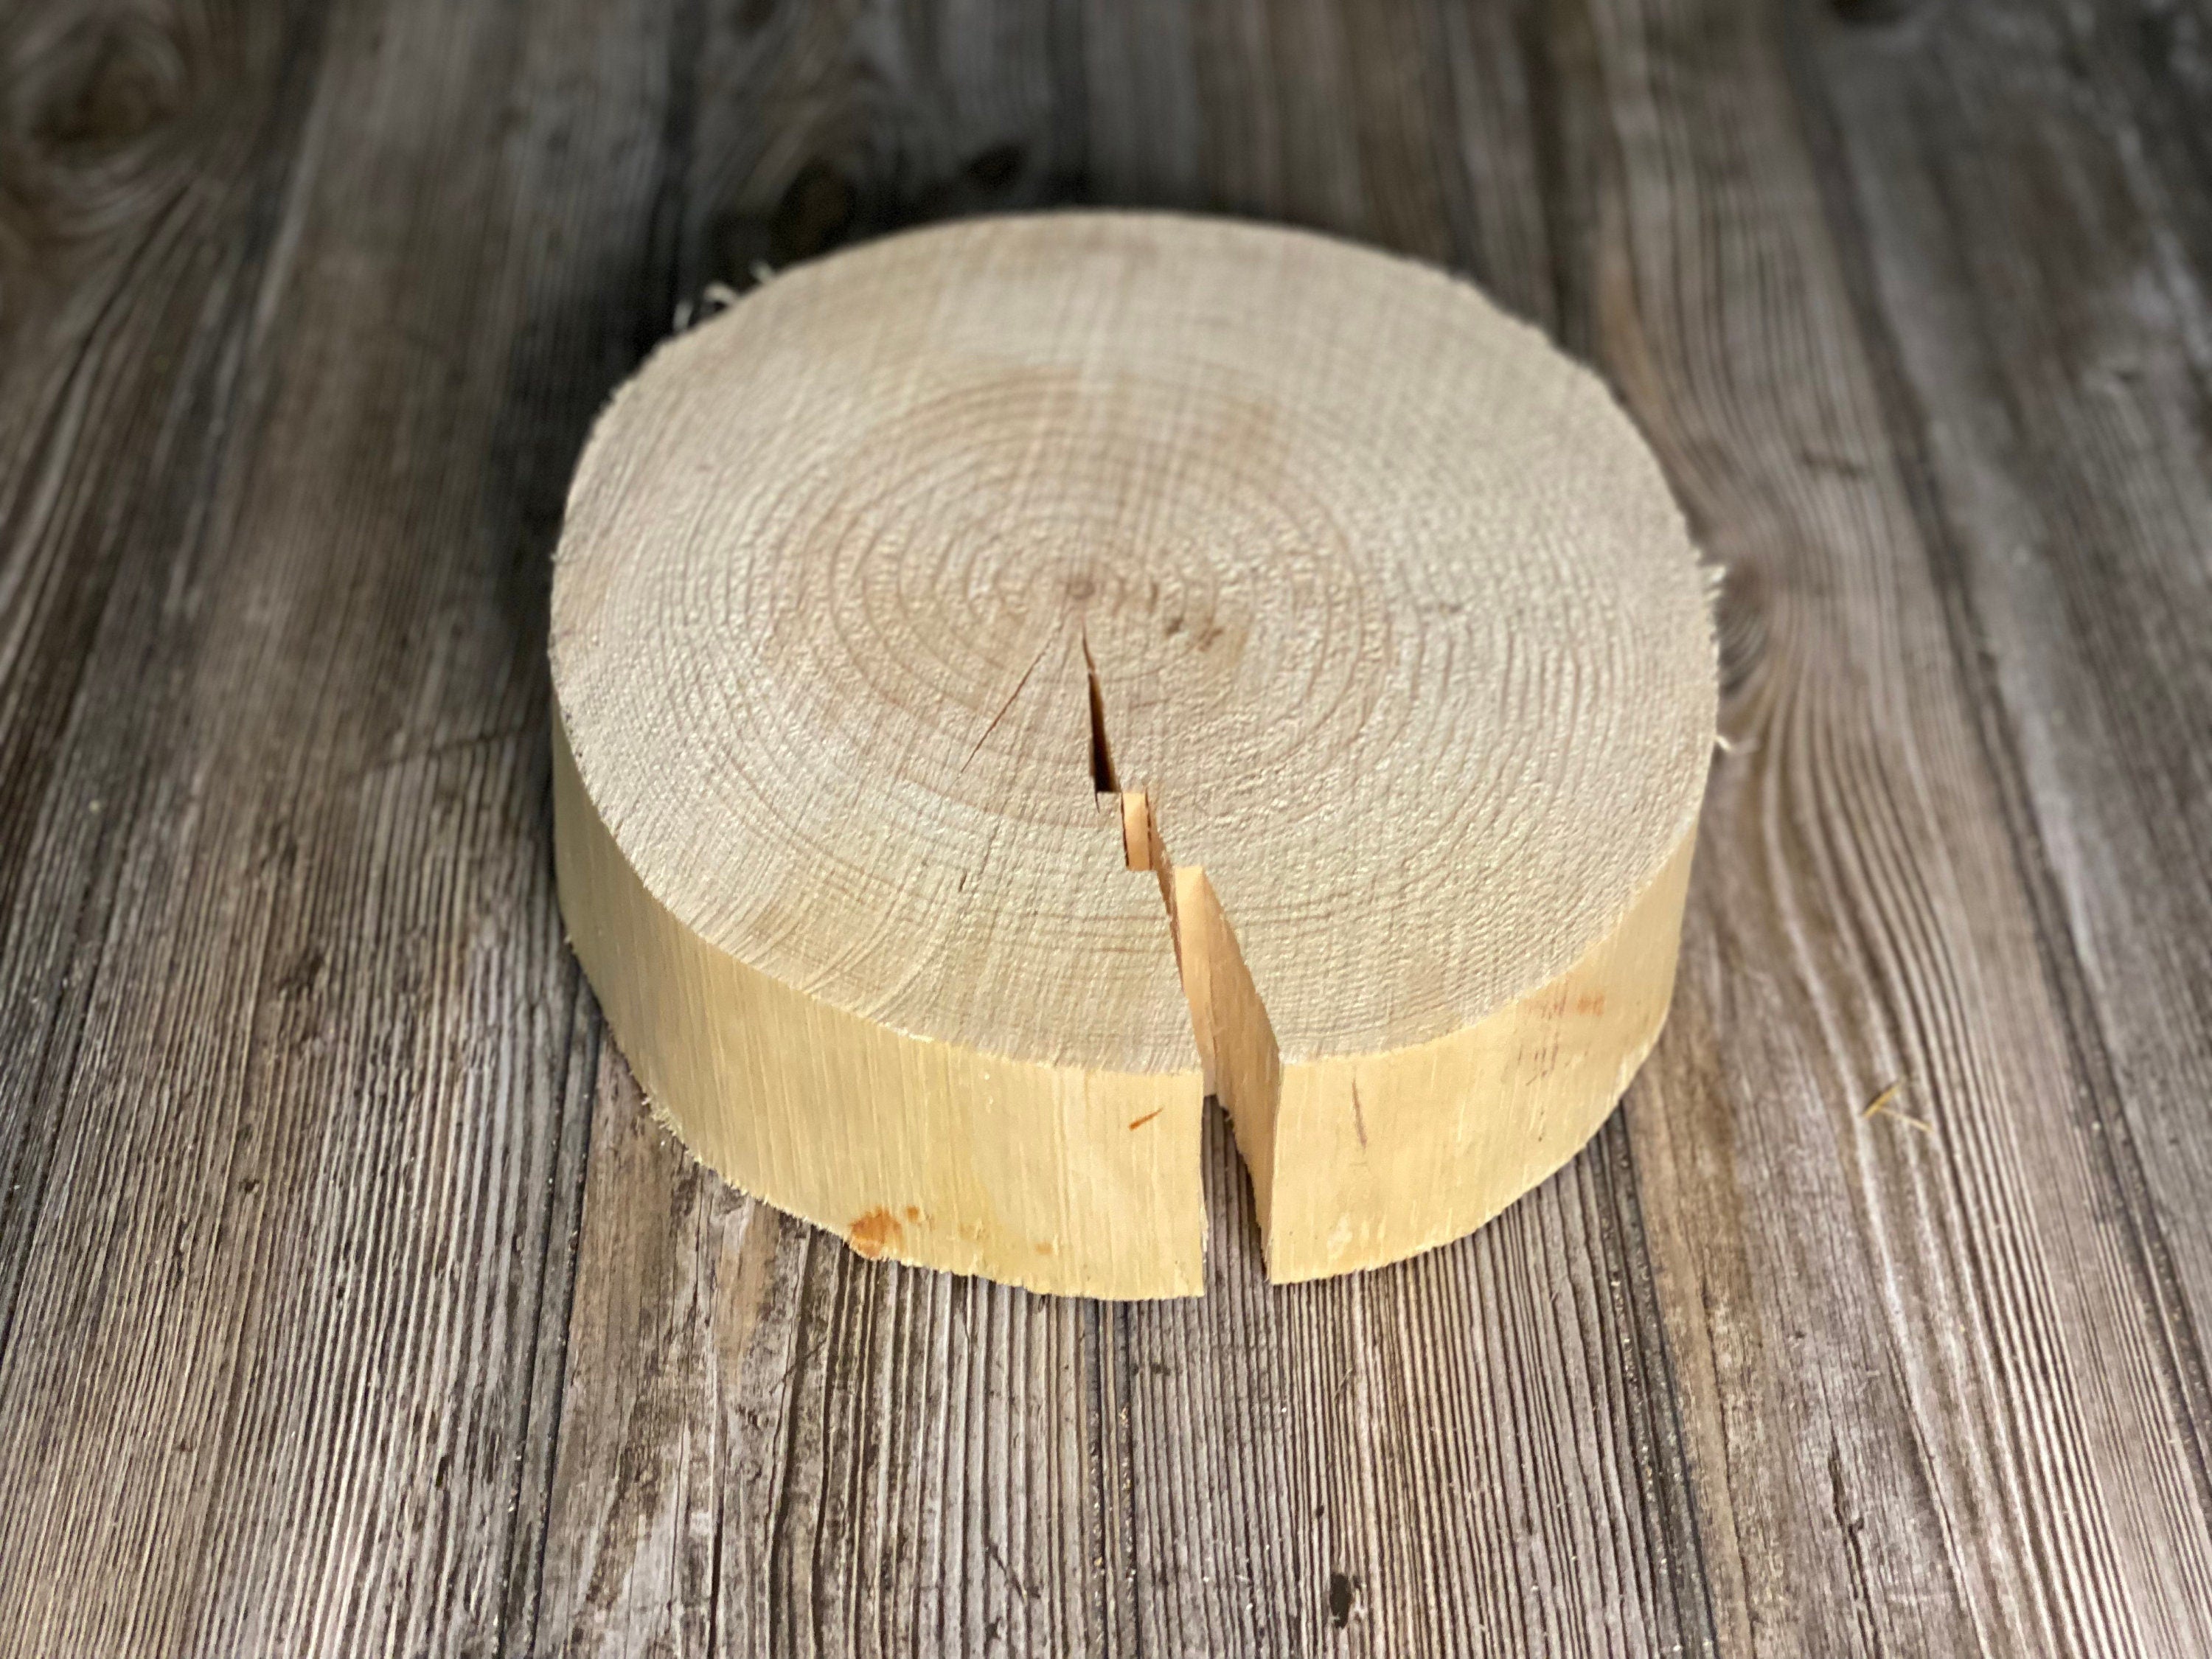 Pine Slice, Approximately 10.5 Inches Long by 9.5 Inches Wide and 2.5 Inches Tall